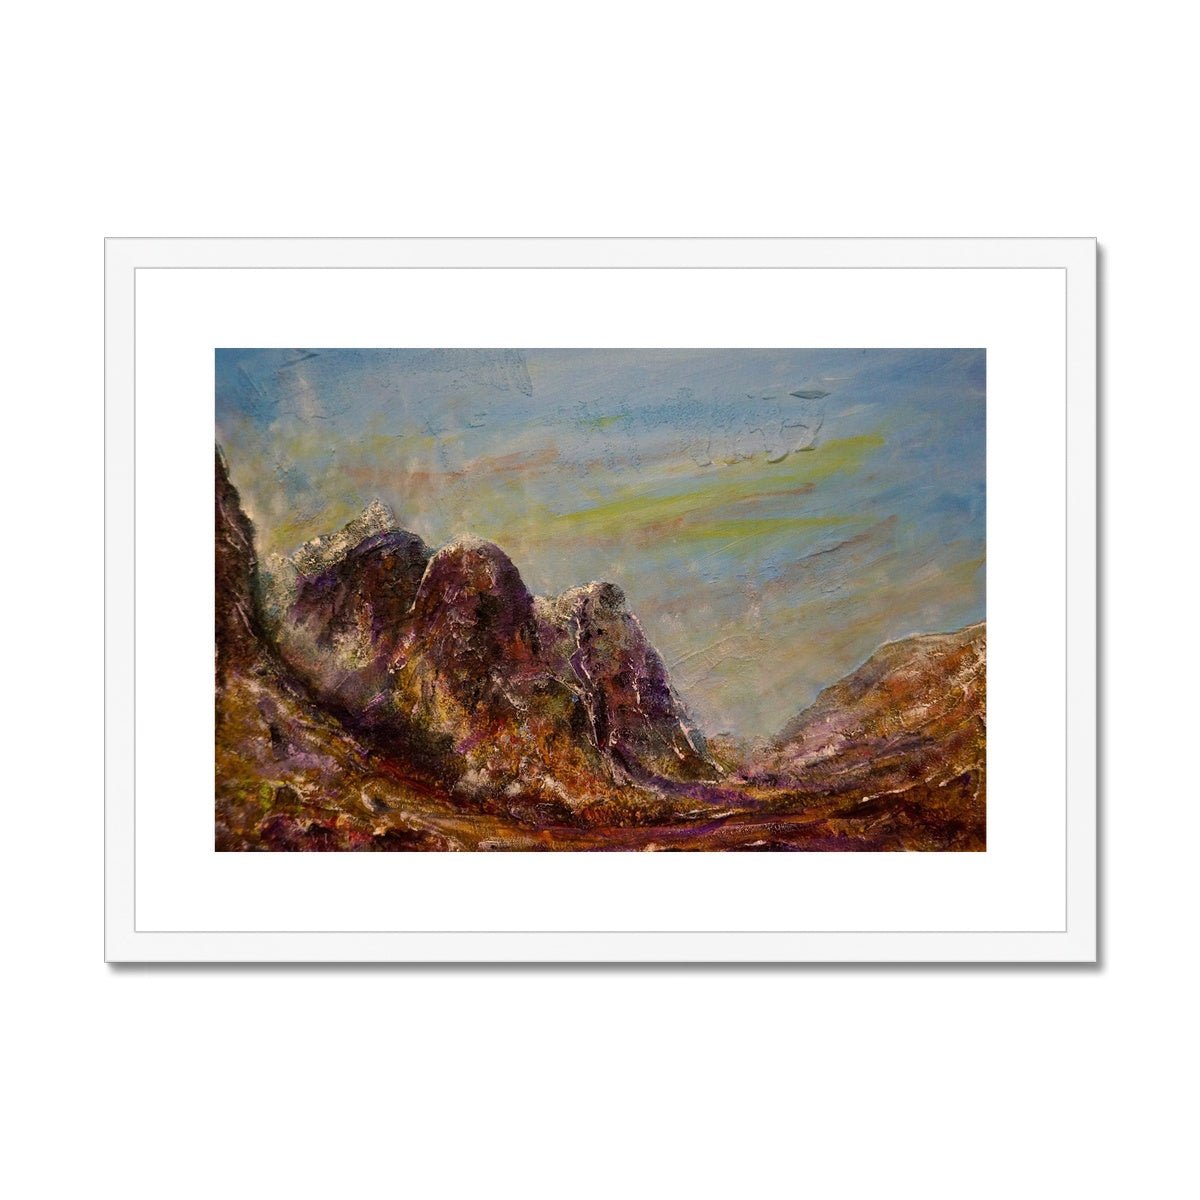 Three Sisters Glencoe Painting | Framed & Mounted Prints From Scotland-Framed & Mounted Prints-Glencoe Art Gallery-A2 Landscape-White Frame-Paintings, Prints, Homeware, Art Gifts From Scotland By Scottish Artist Kevin Hunter